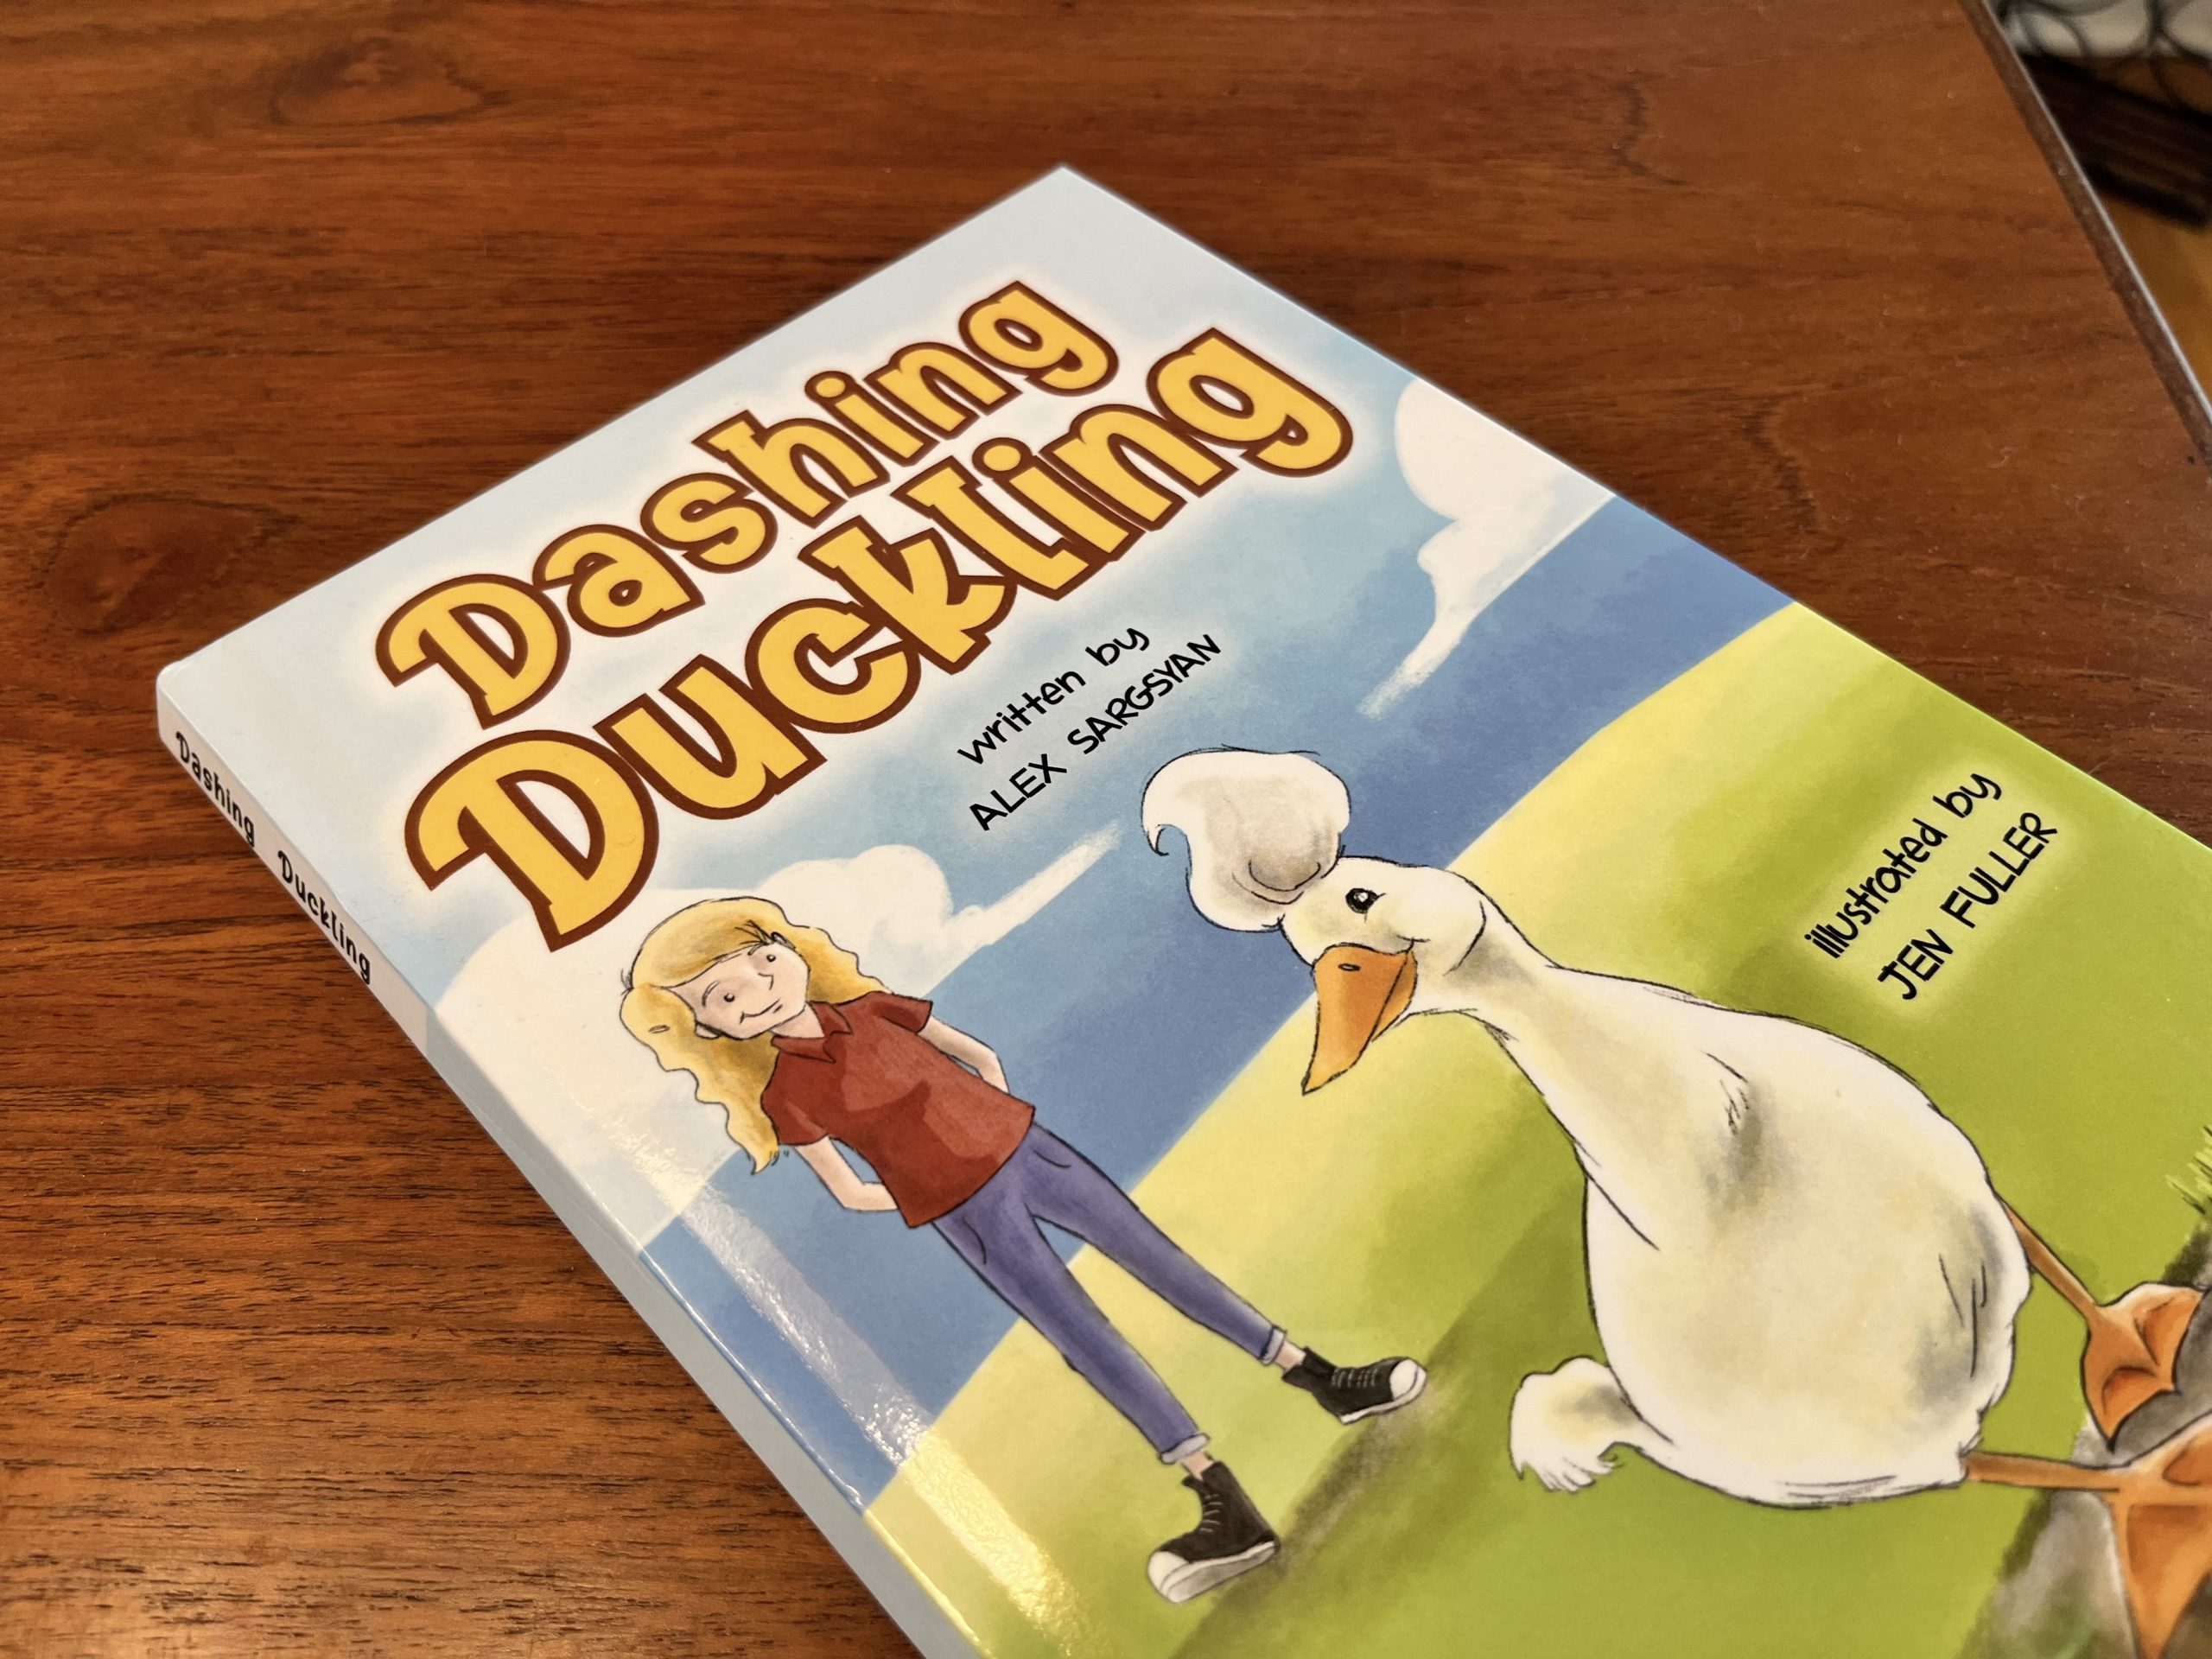 Dashing Duckling: A Kid’s Book with Political Intrigue